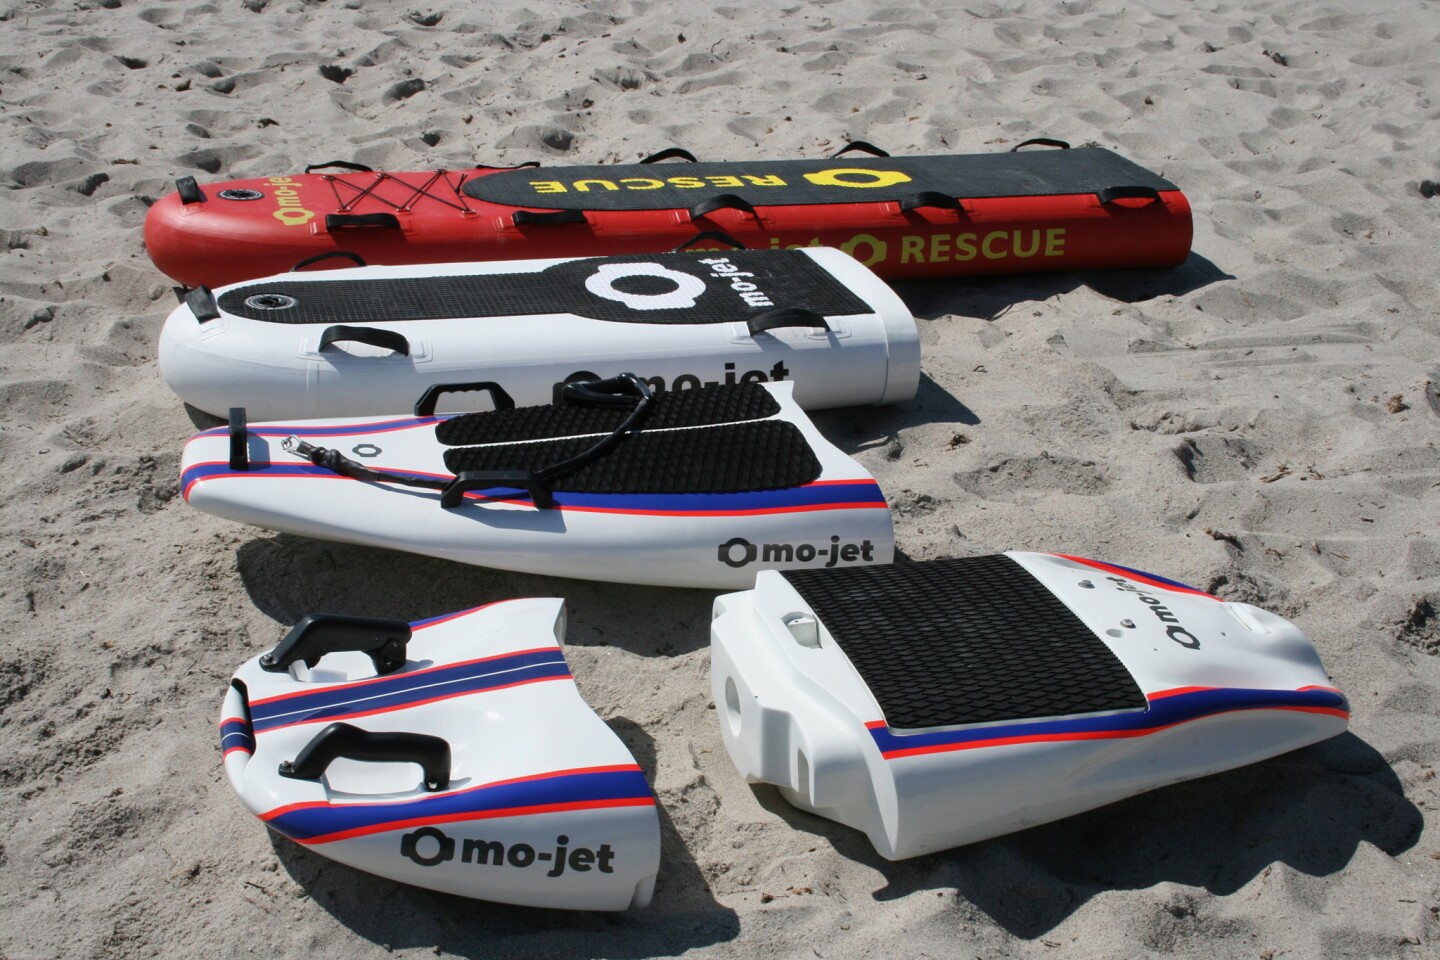 From top to bottom, the mo-jet Rescue, Surf Air, Surf and Bodyboard front modules, with the rear power module to the right